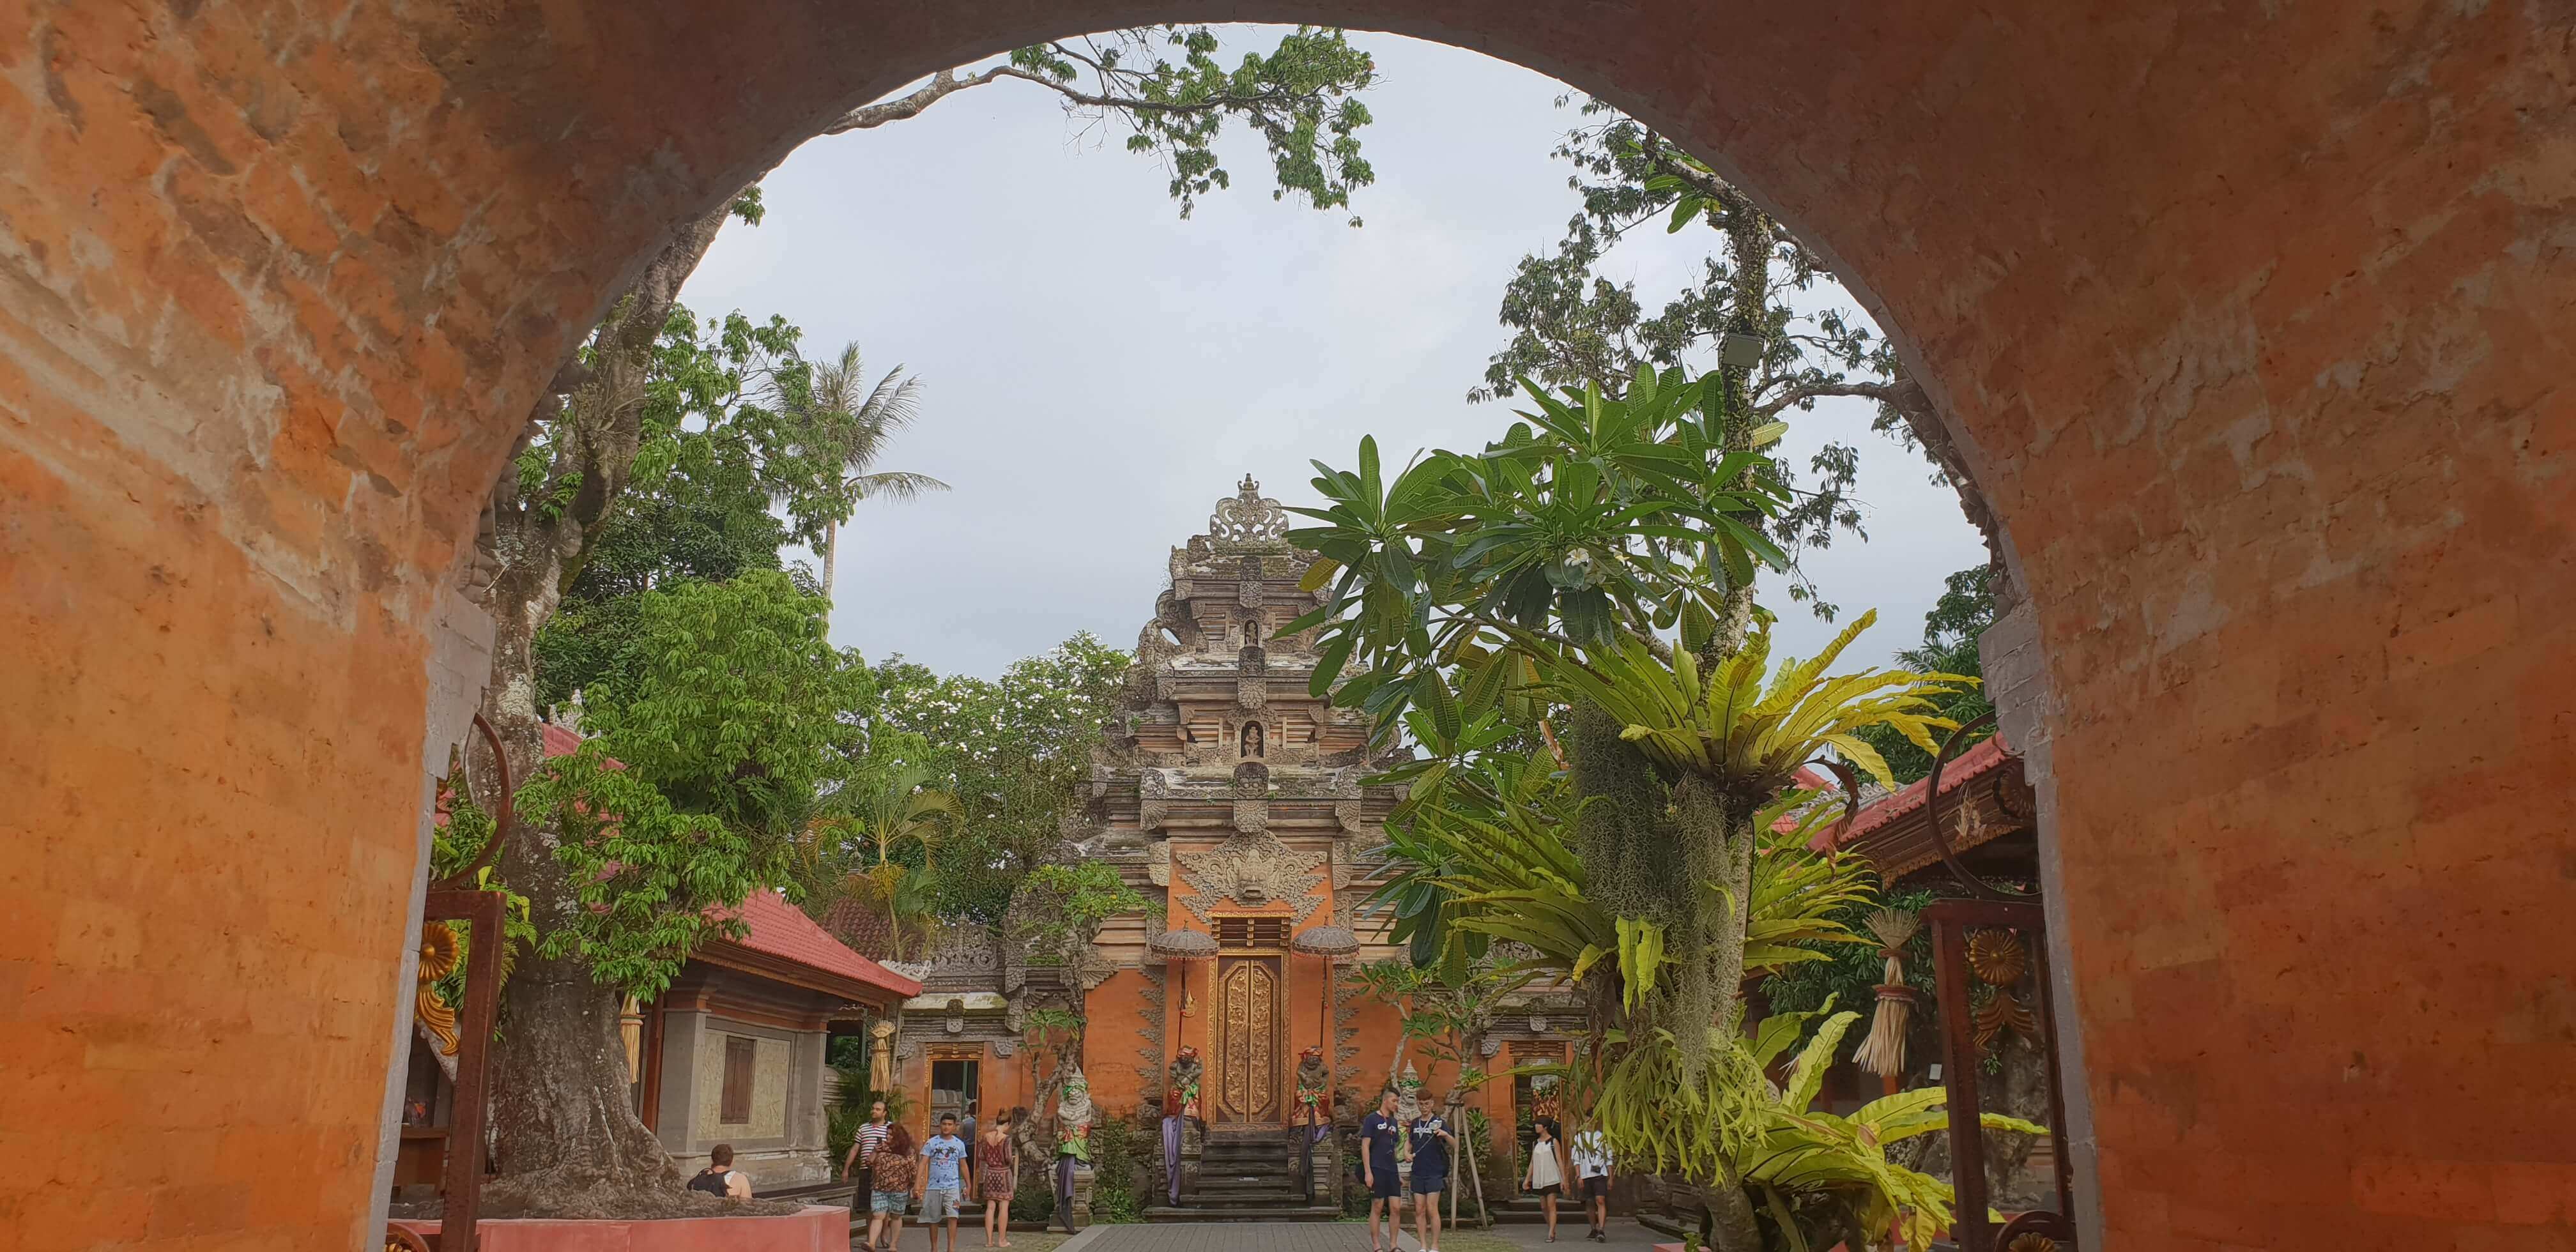 A view of the Puri Saren Agung also called the Ubud Royal Palace